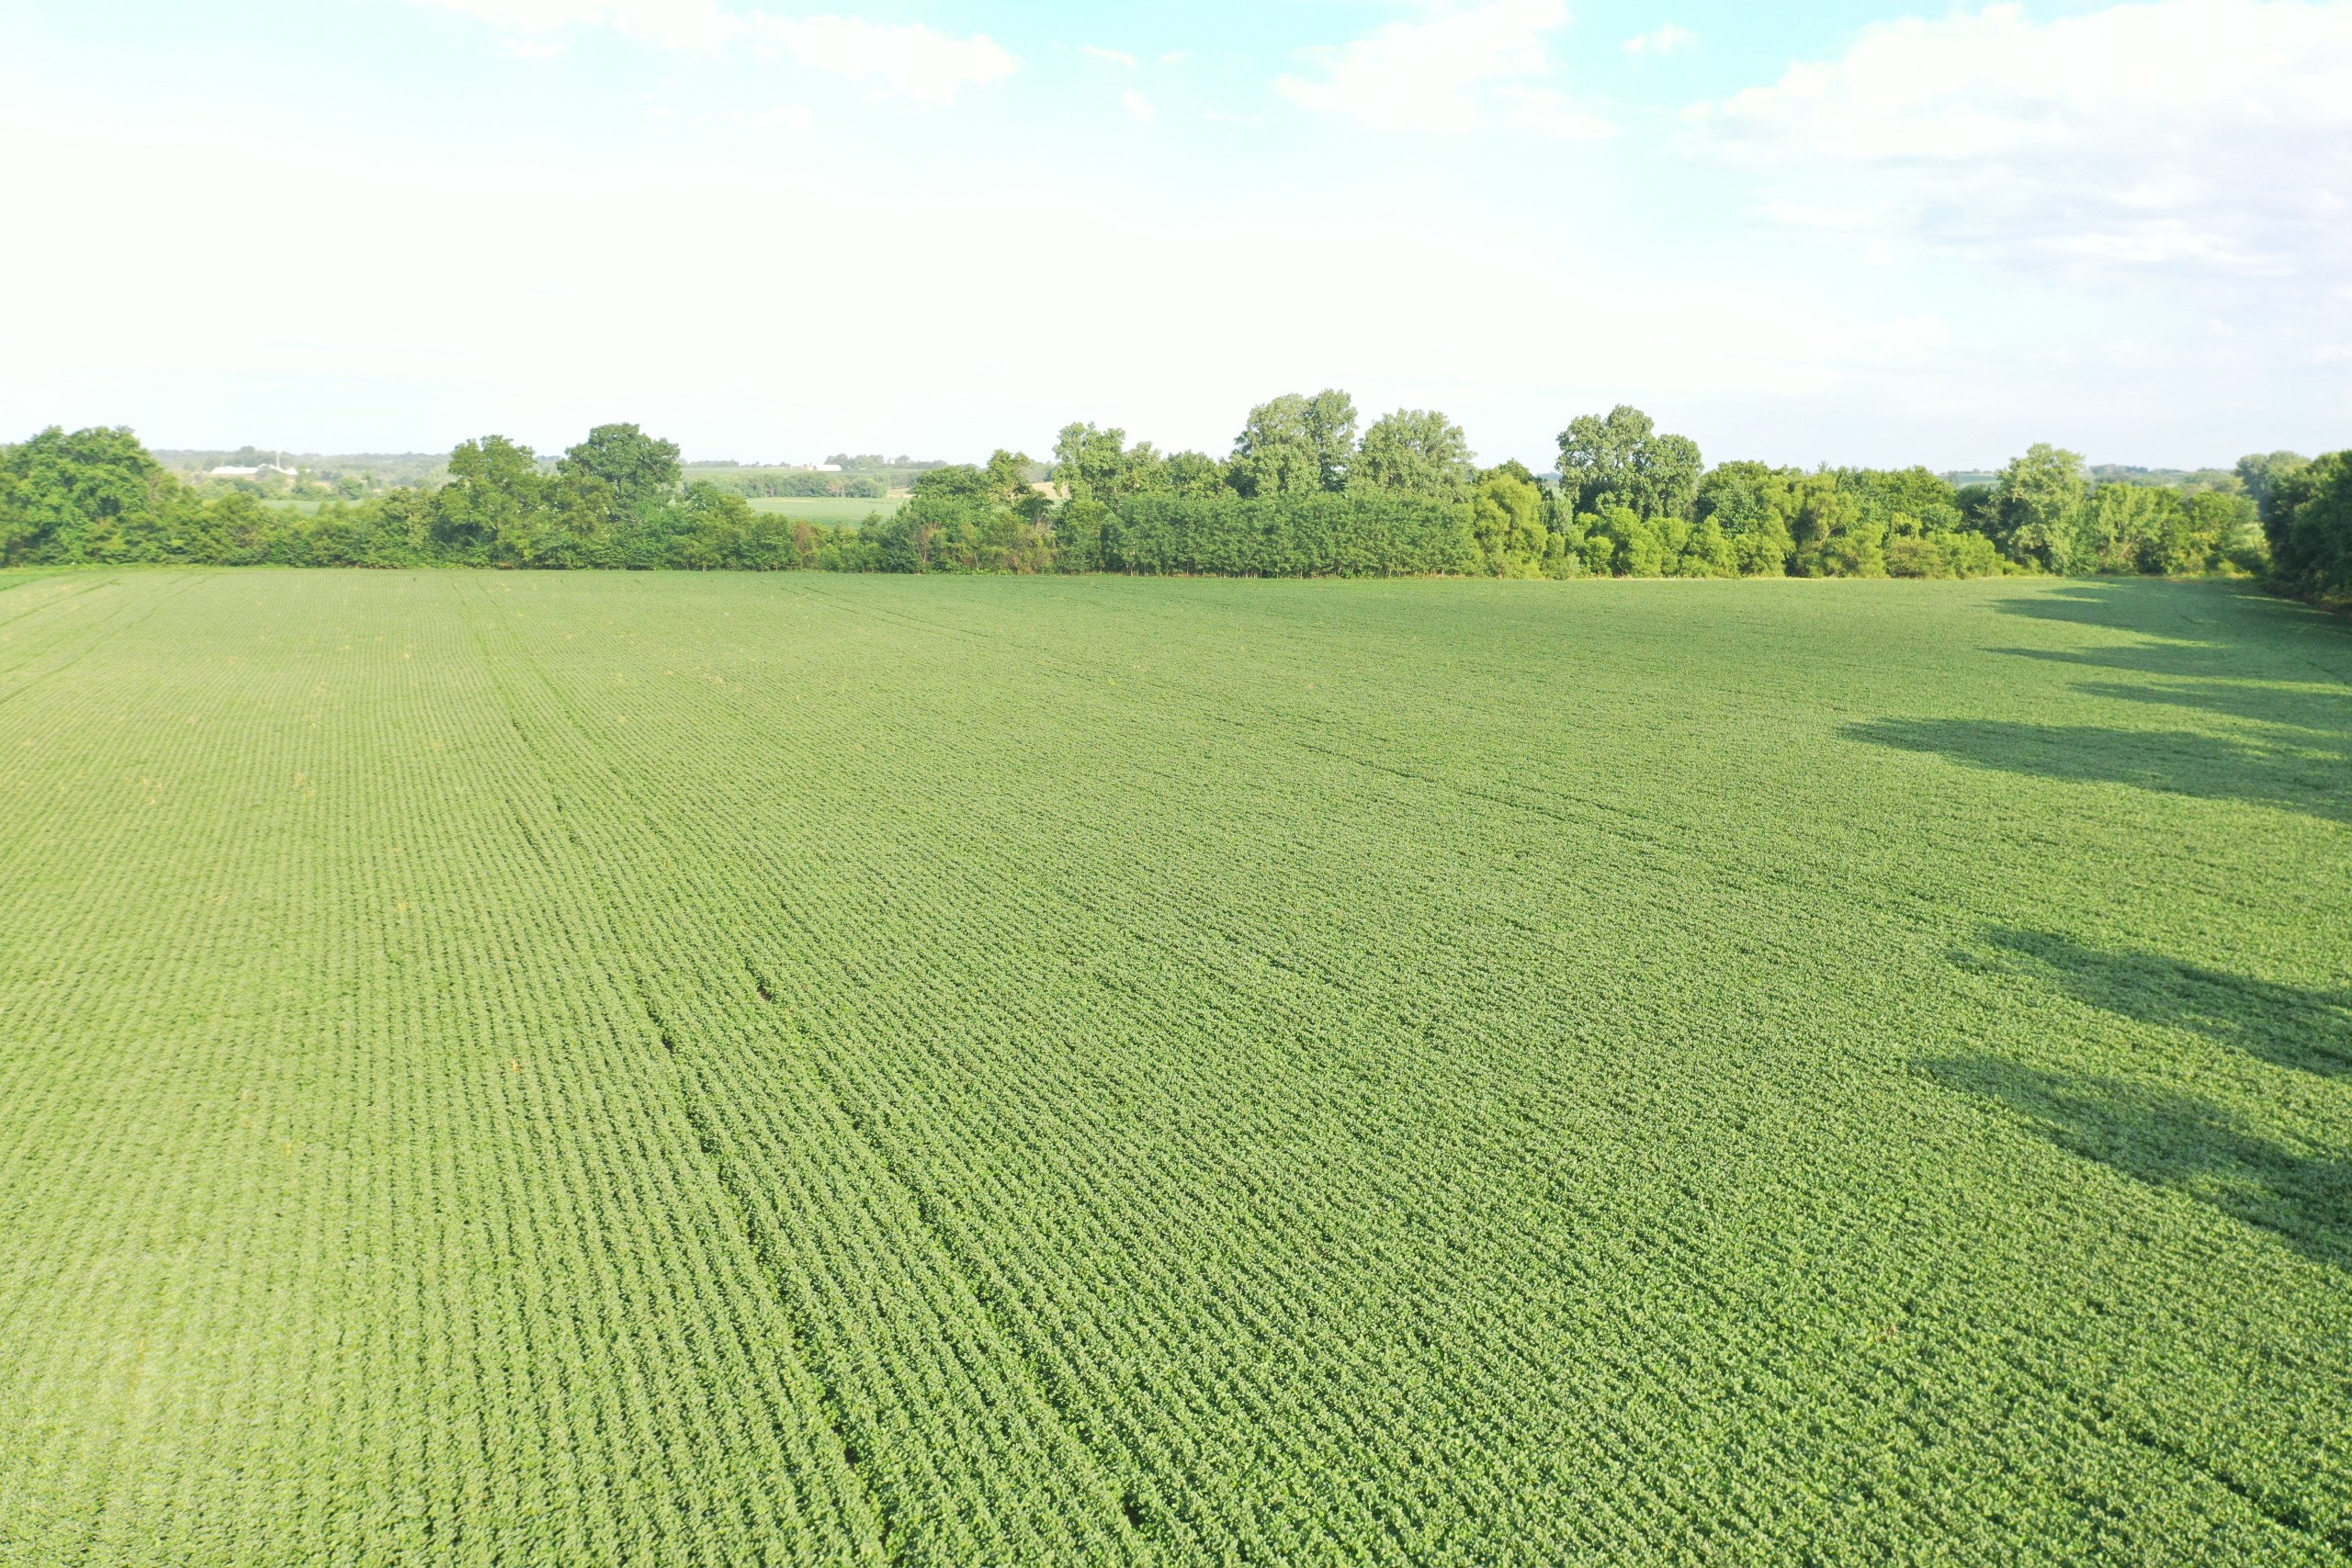 land-marion-county-iowa-16-acres-listing-number-16309-DJI_0714-1.jpg